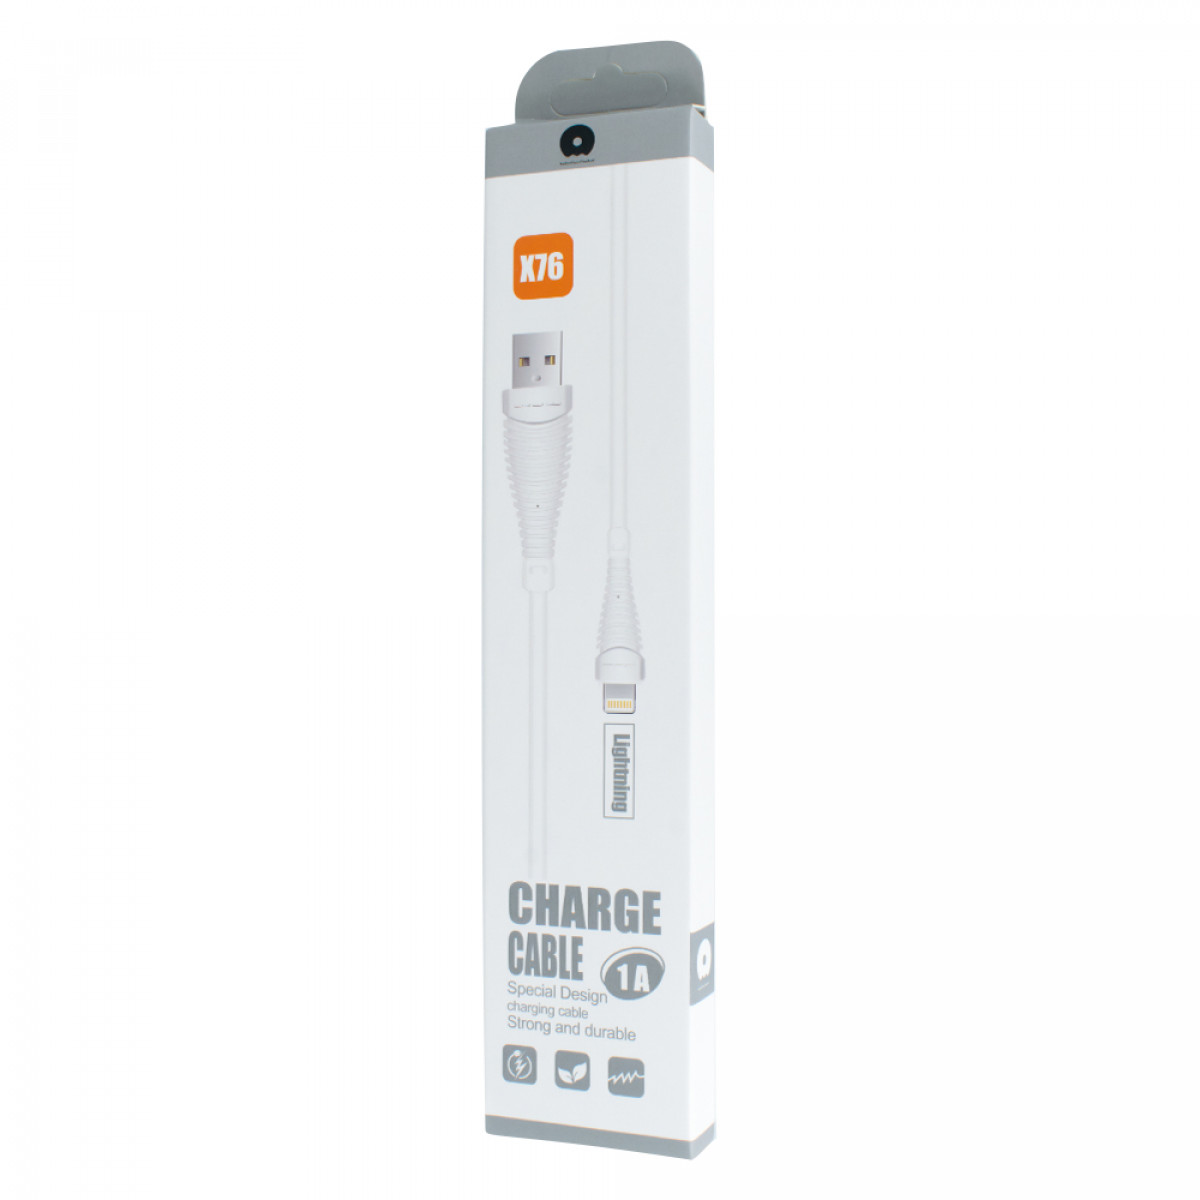 WUW Lightning Charge Cable X76